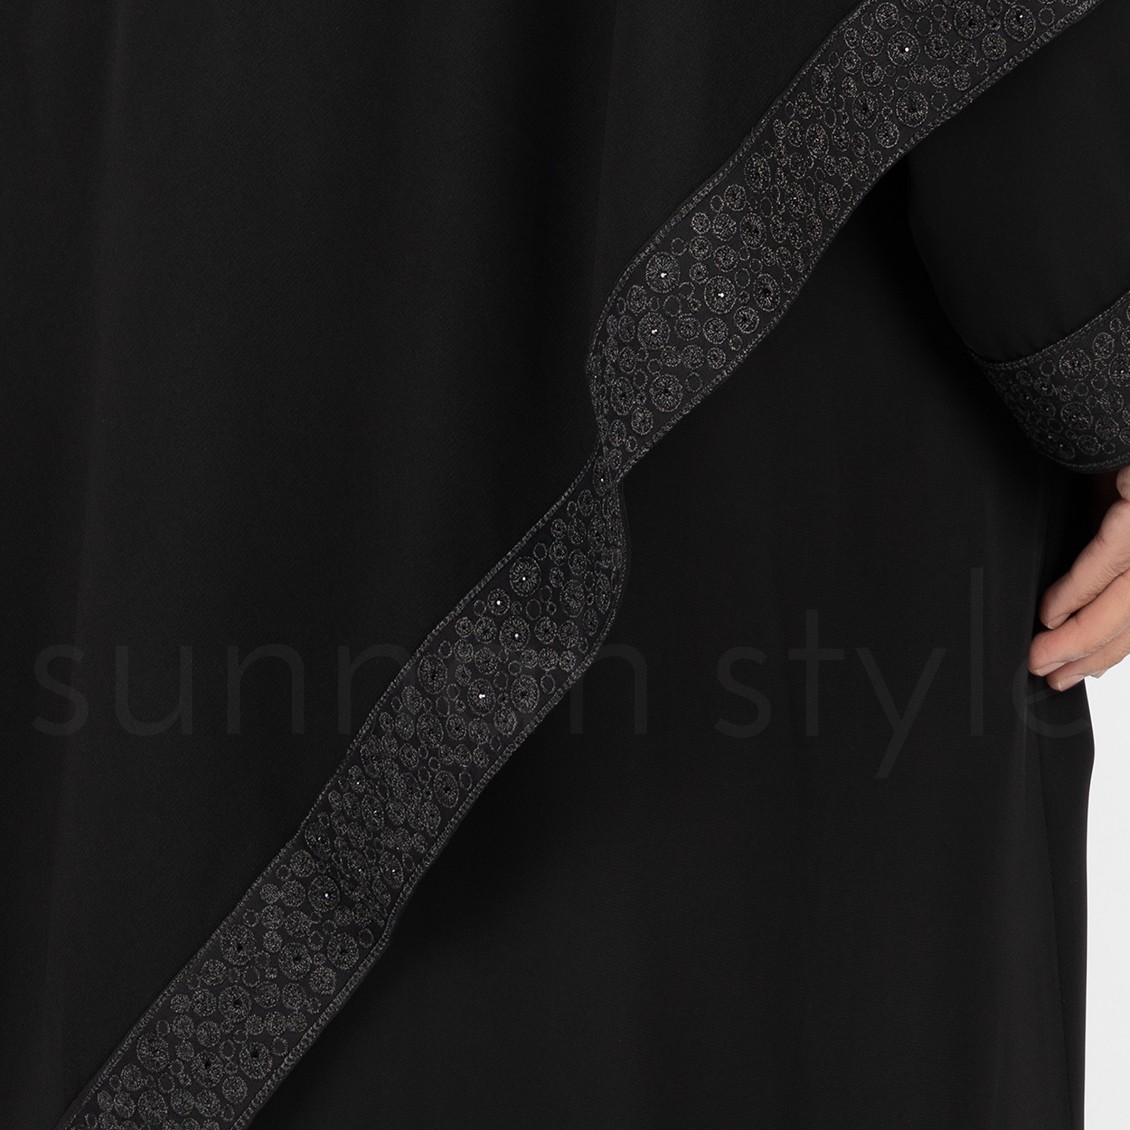 Sunnah Style Glimmer Shayla Embroidered Hijab Black